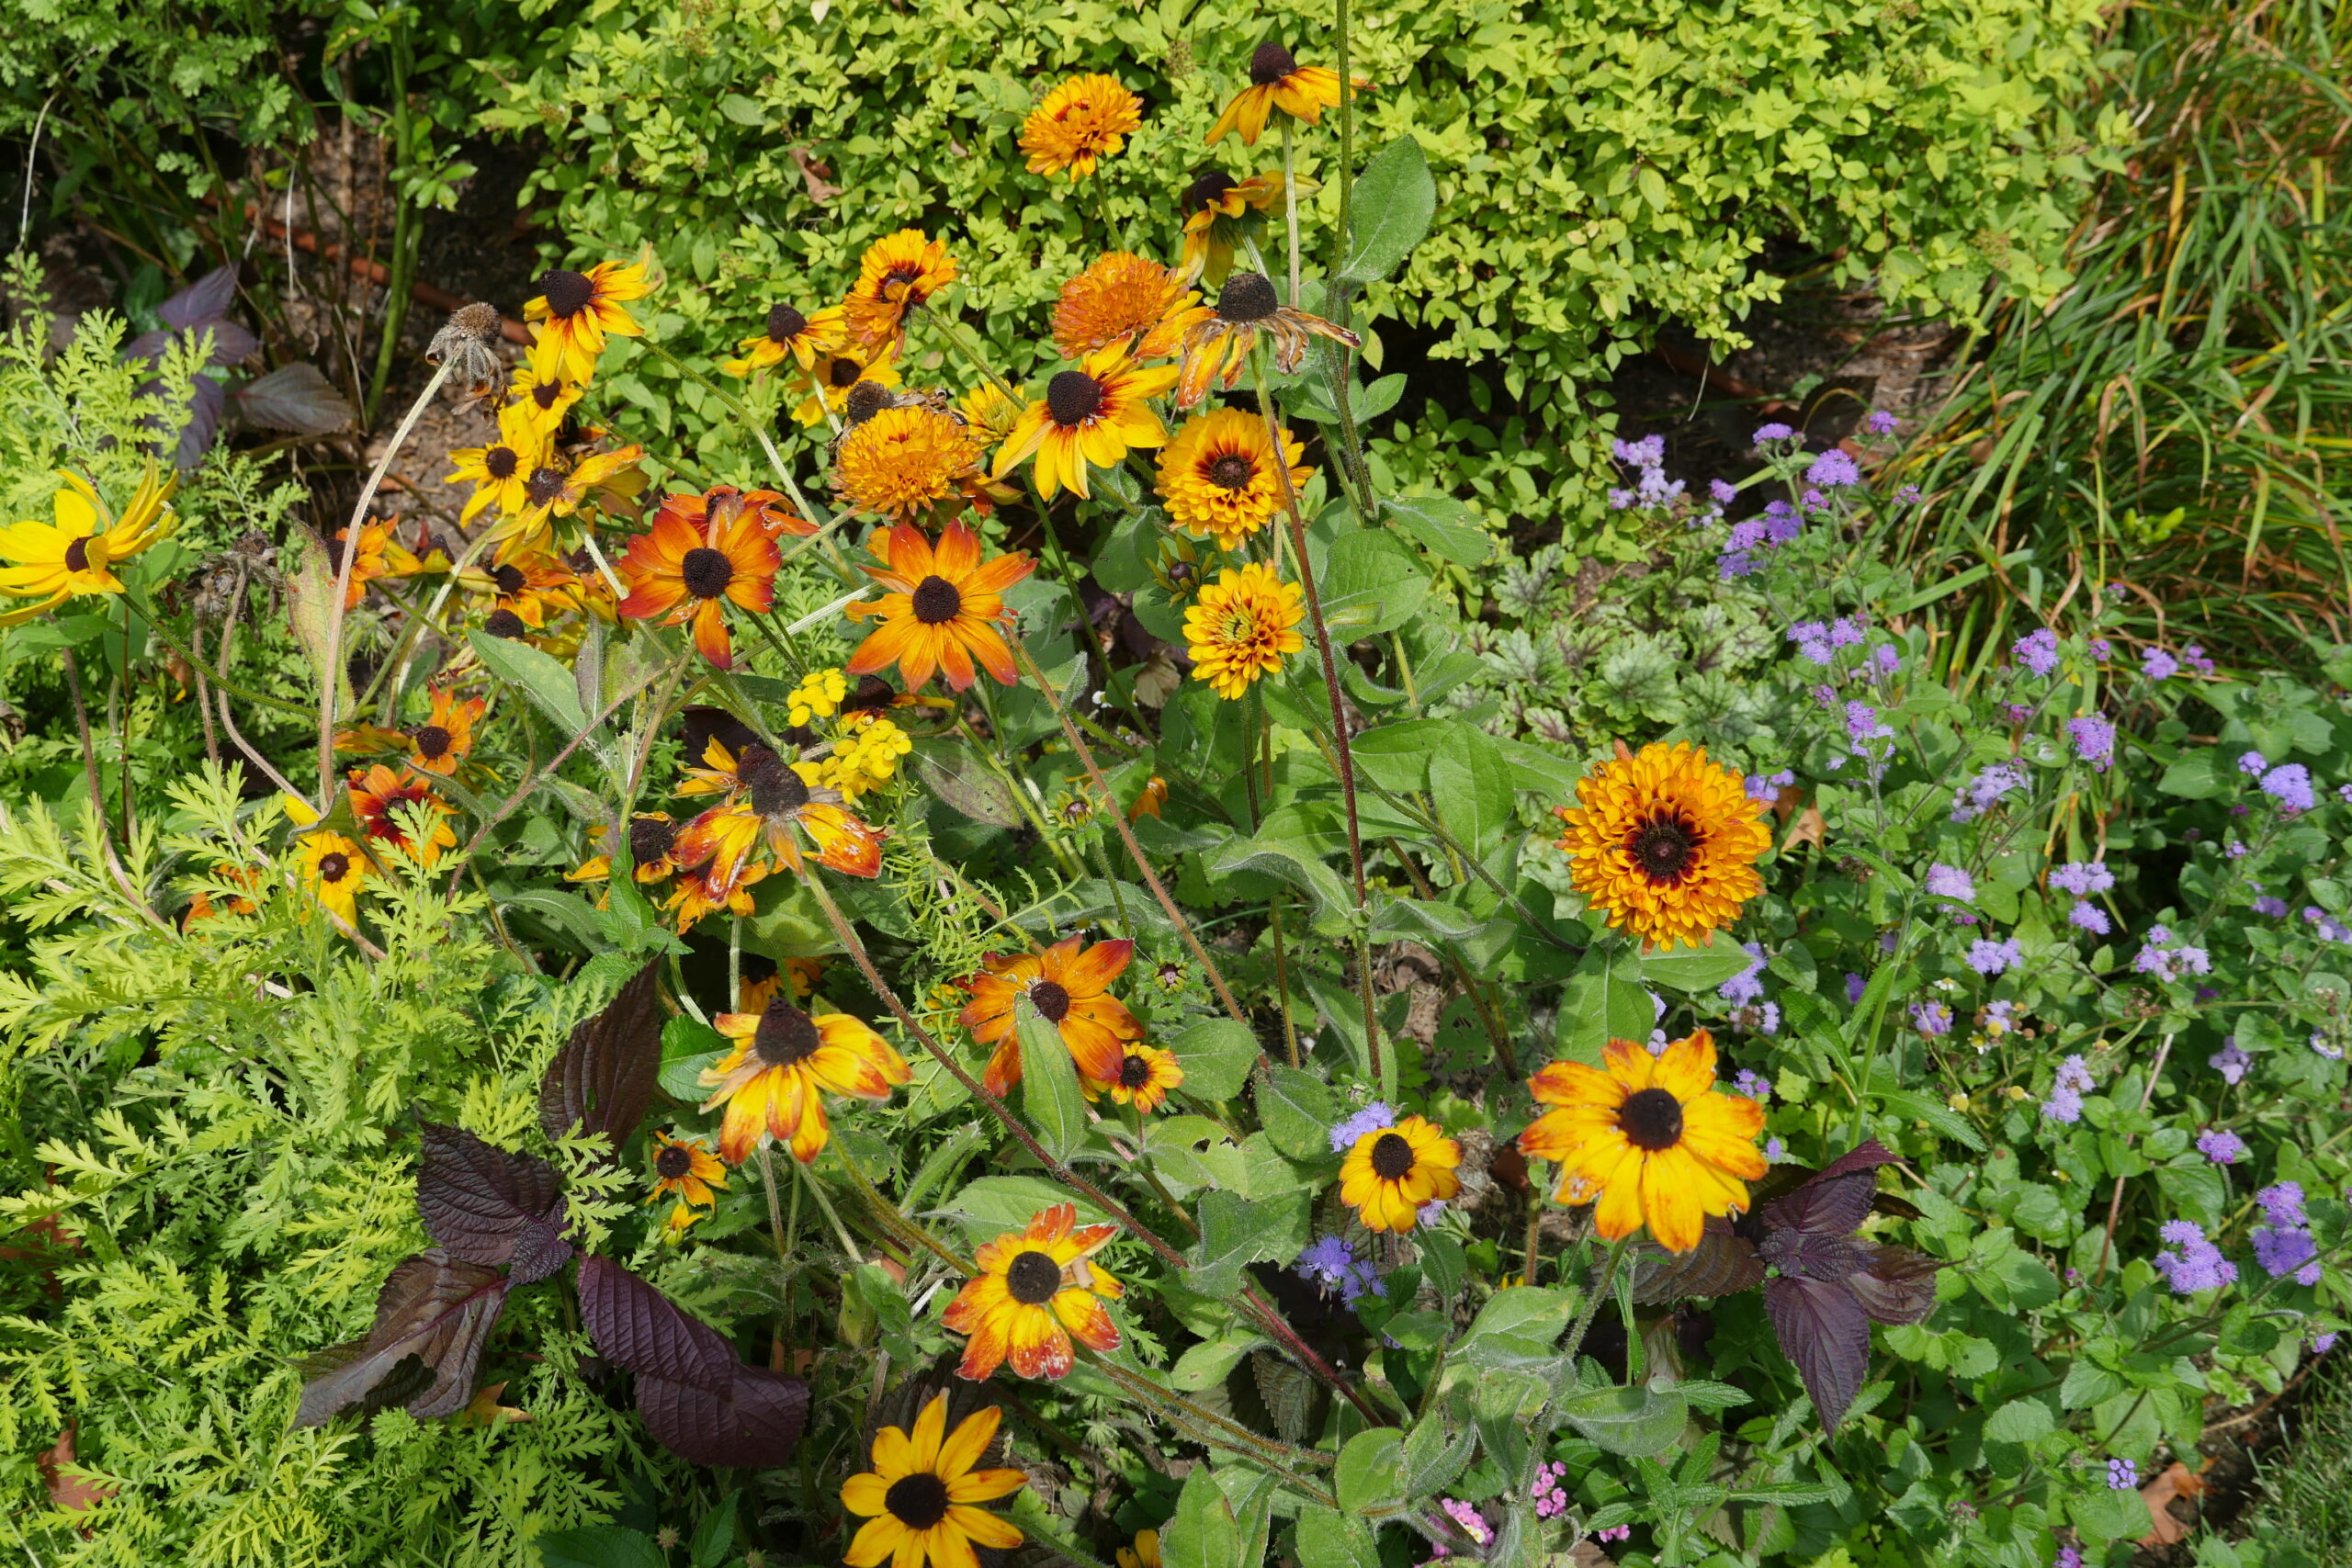 Rudbeckias grown from a seed mix resulted in various flower styles, some looking like multi-colored zinnias. The singles are more likely to return the following year either from dropped seed or plants. The doubles and triples are not as reliable repeaters. ANDREW MESSINGER